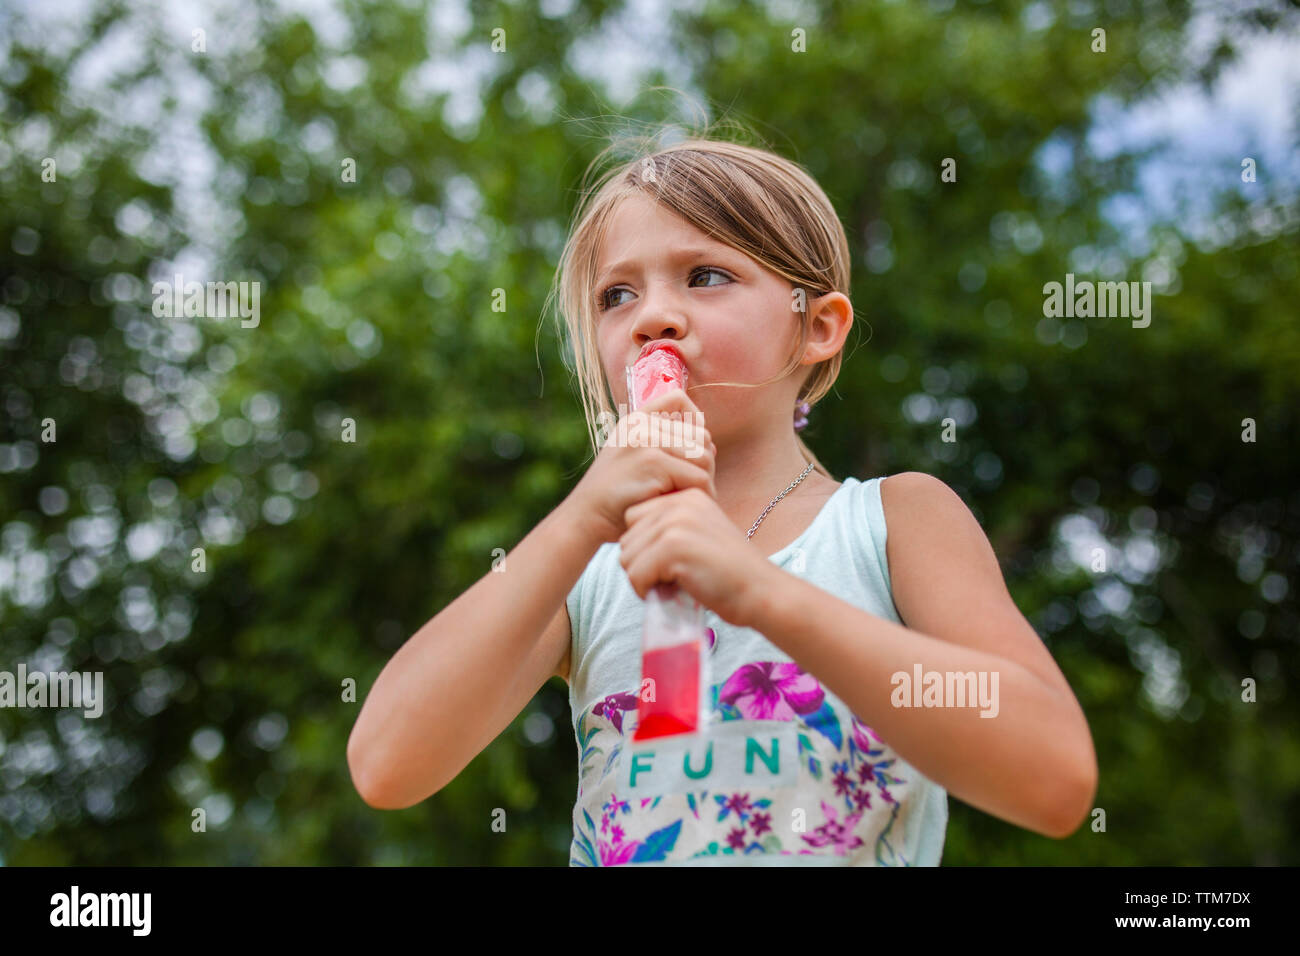 Low angle view of girl looking away while eating flavored ice at park Stock Photo